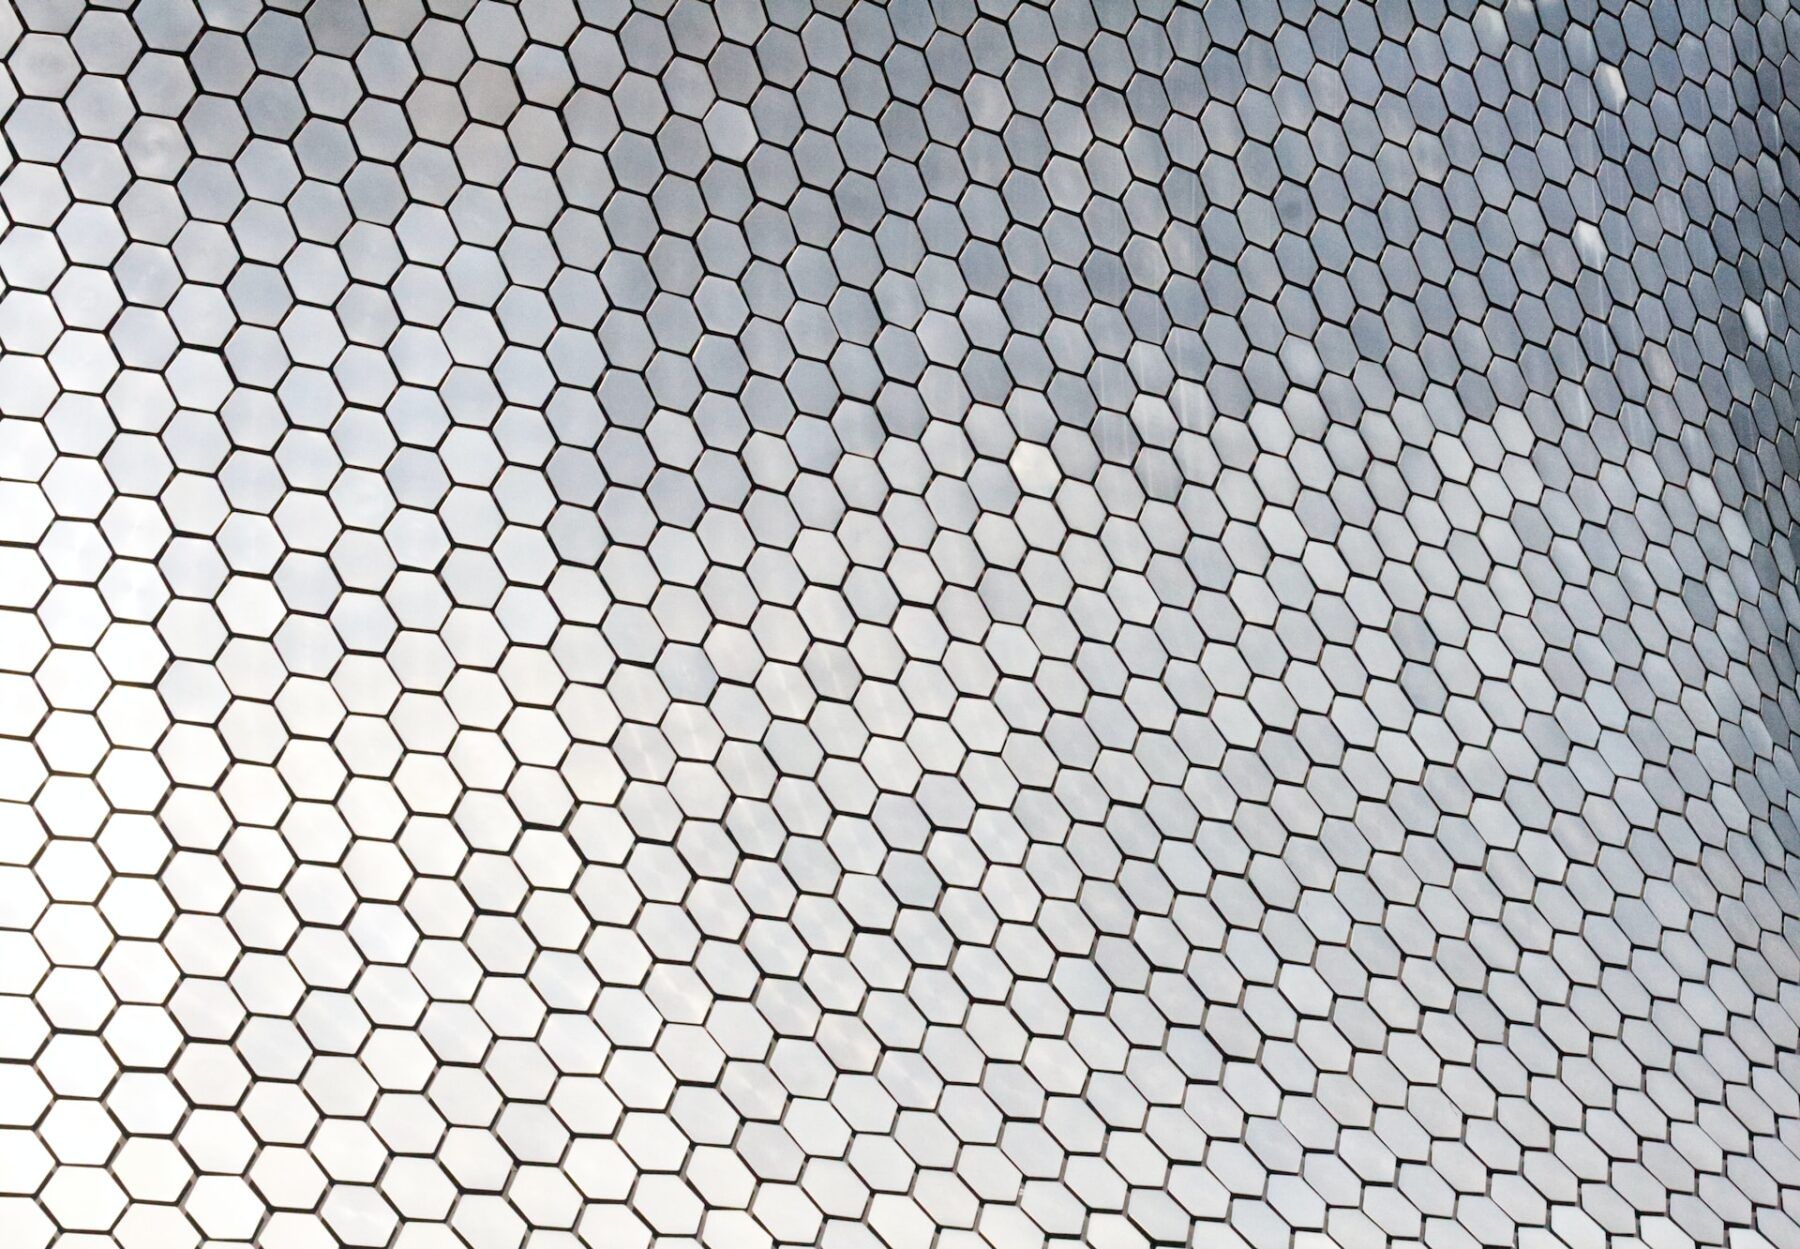 abstract image of a zoomed in building which is made up of small metallic hexagons creating a modern honeycomb with a gradient from shiny whites to darker, shadowed greys